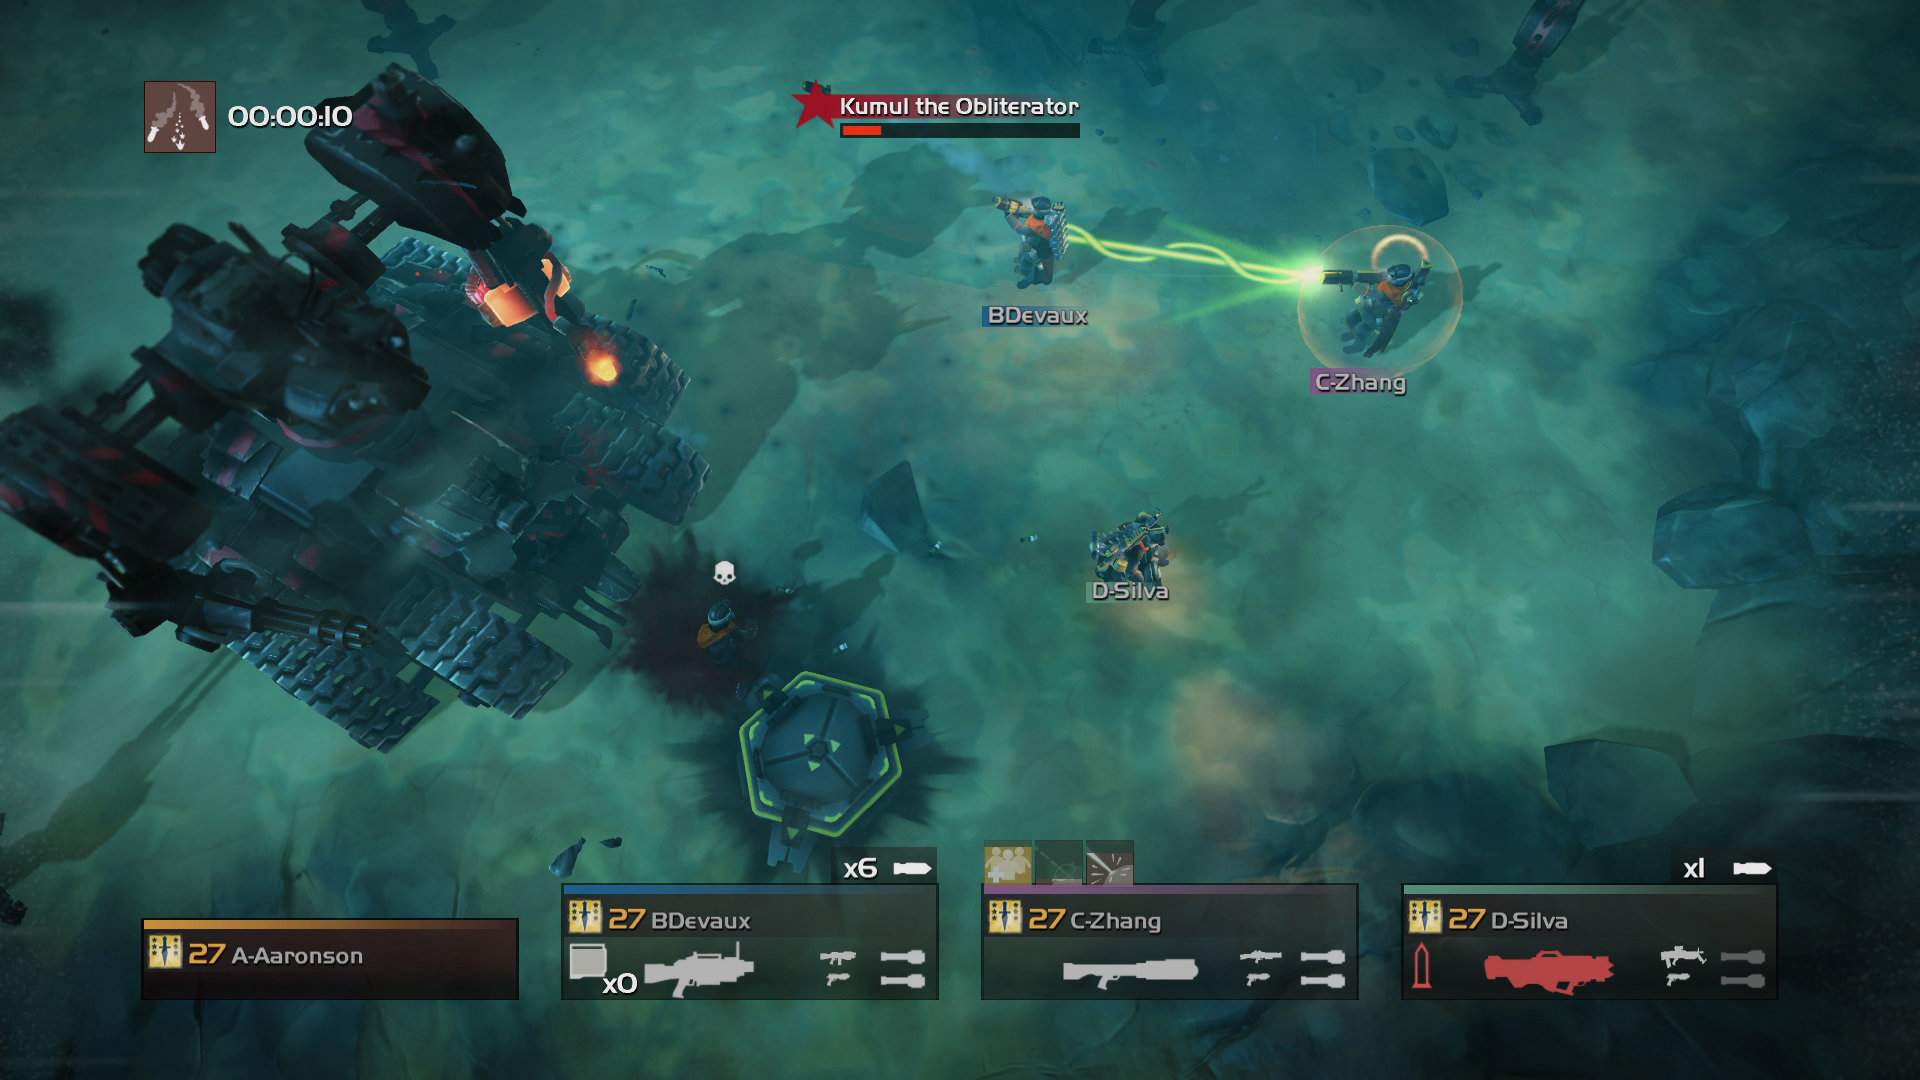 helldivers 2 people